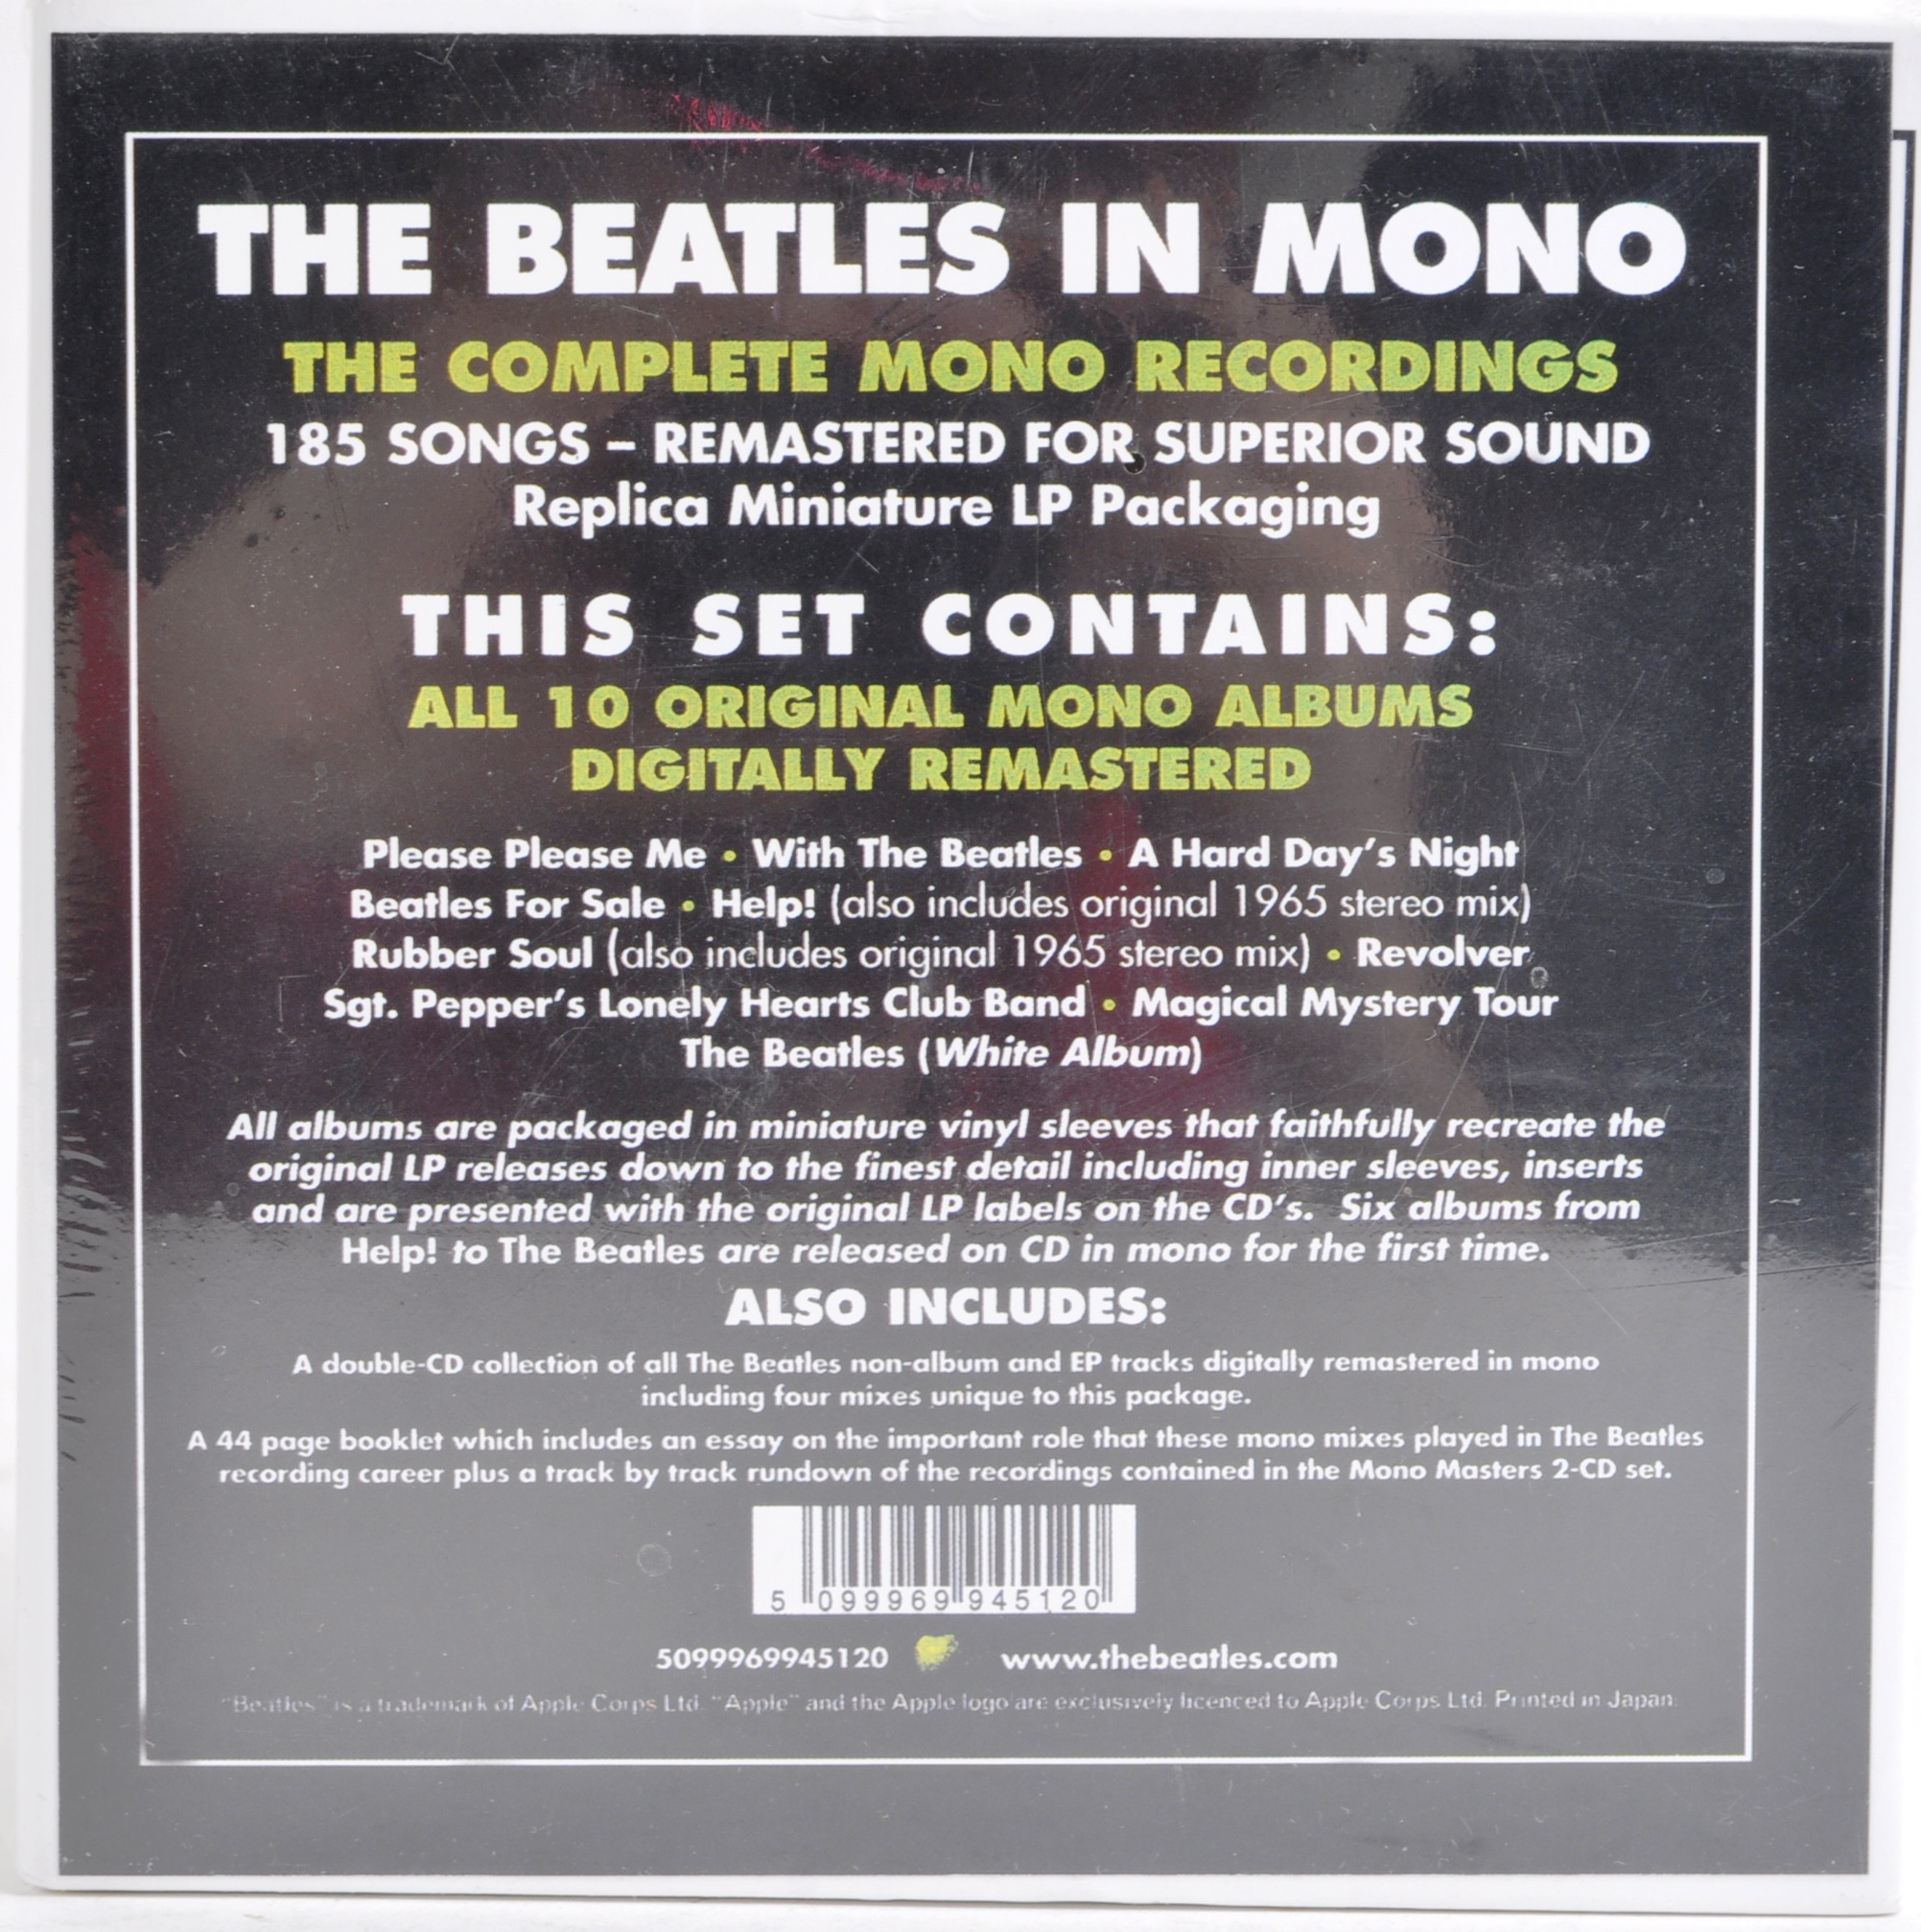 THE BEATLES IN MONO CD BOX SET BRAND NEW AND SEALED - Image 2 of 3